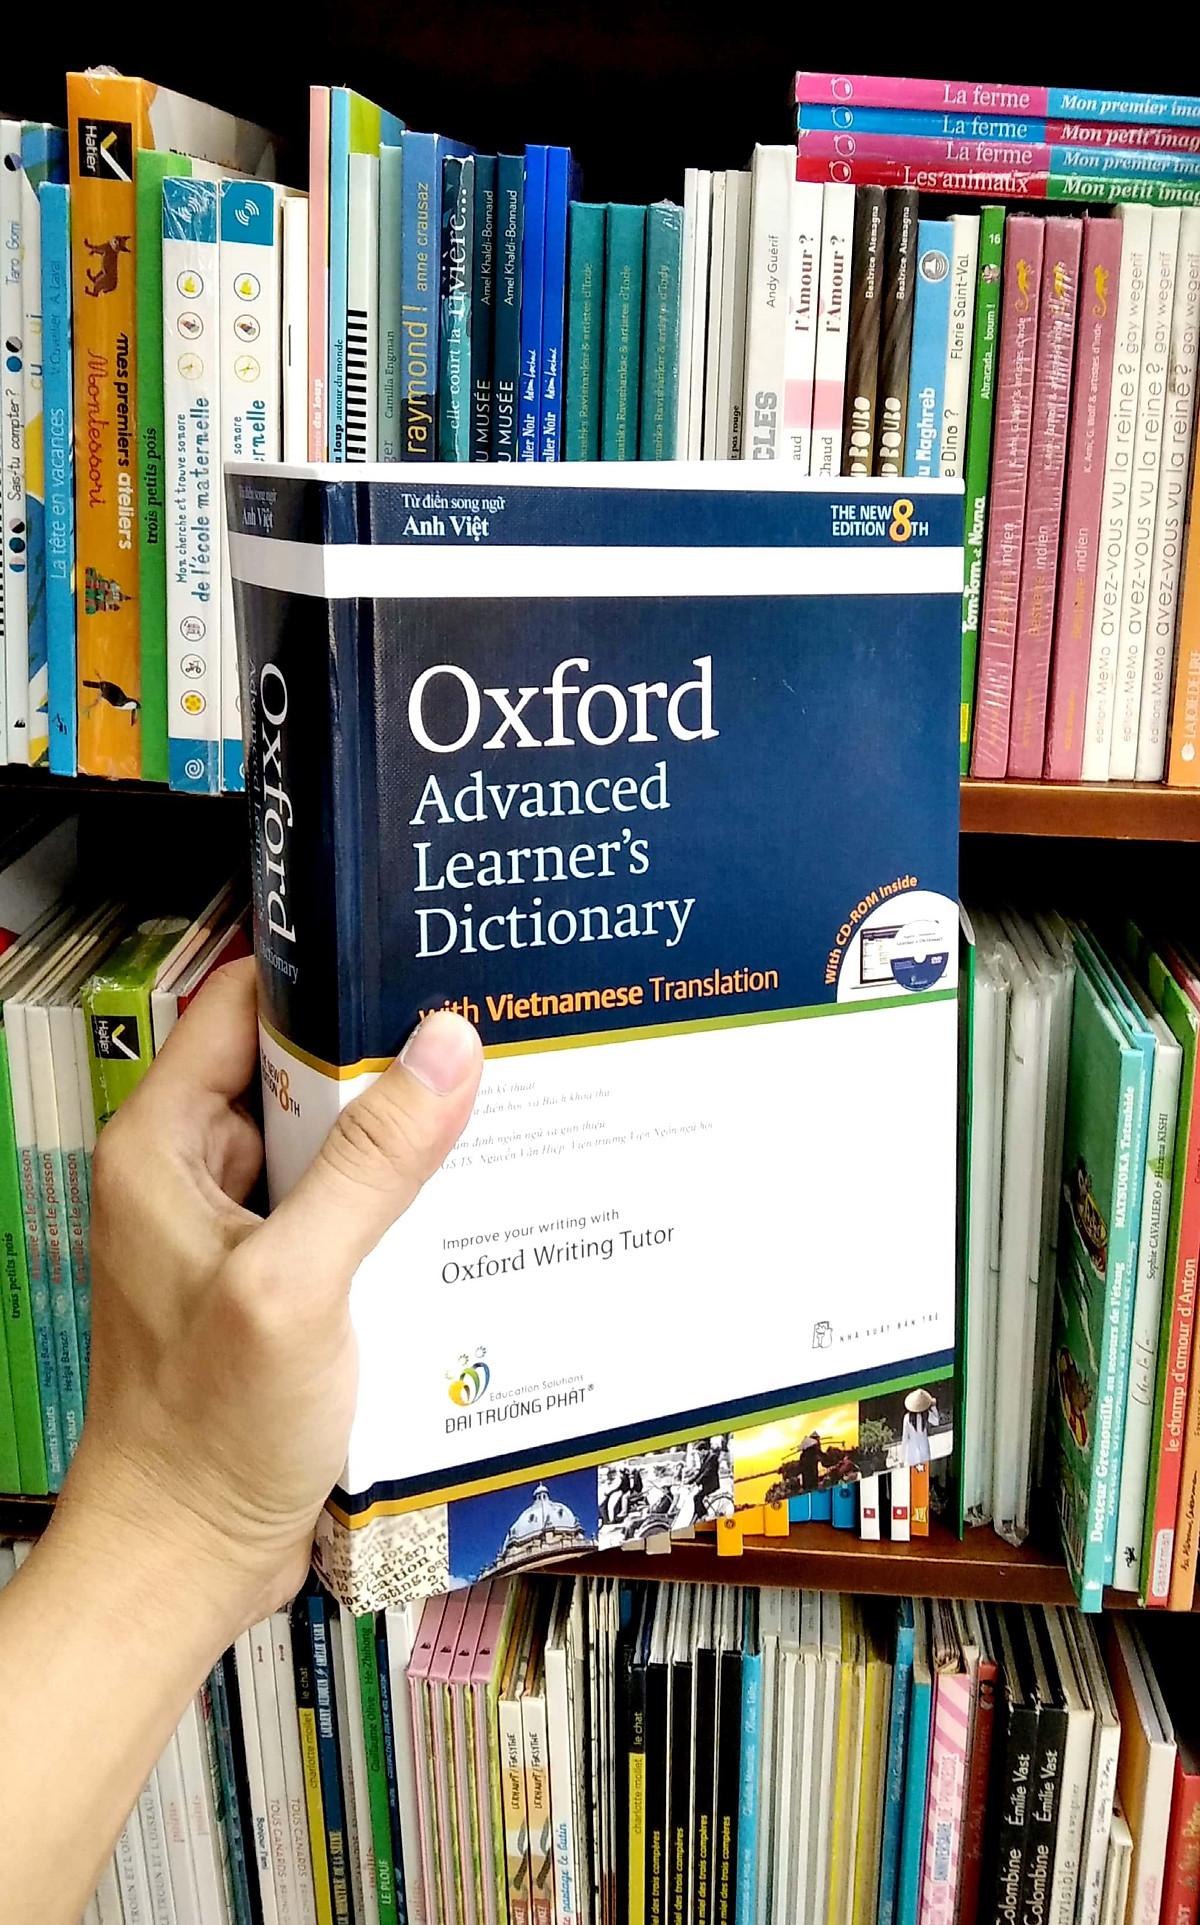 Oxford Advanced Learner's Dictionary 8th Edition (With Vietnamese Translation) and CD - ROM (Hardback)